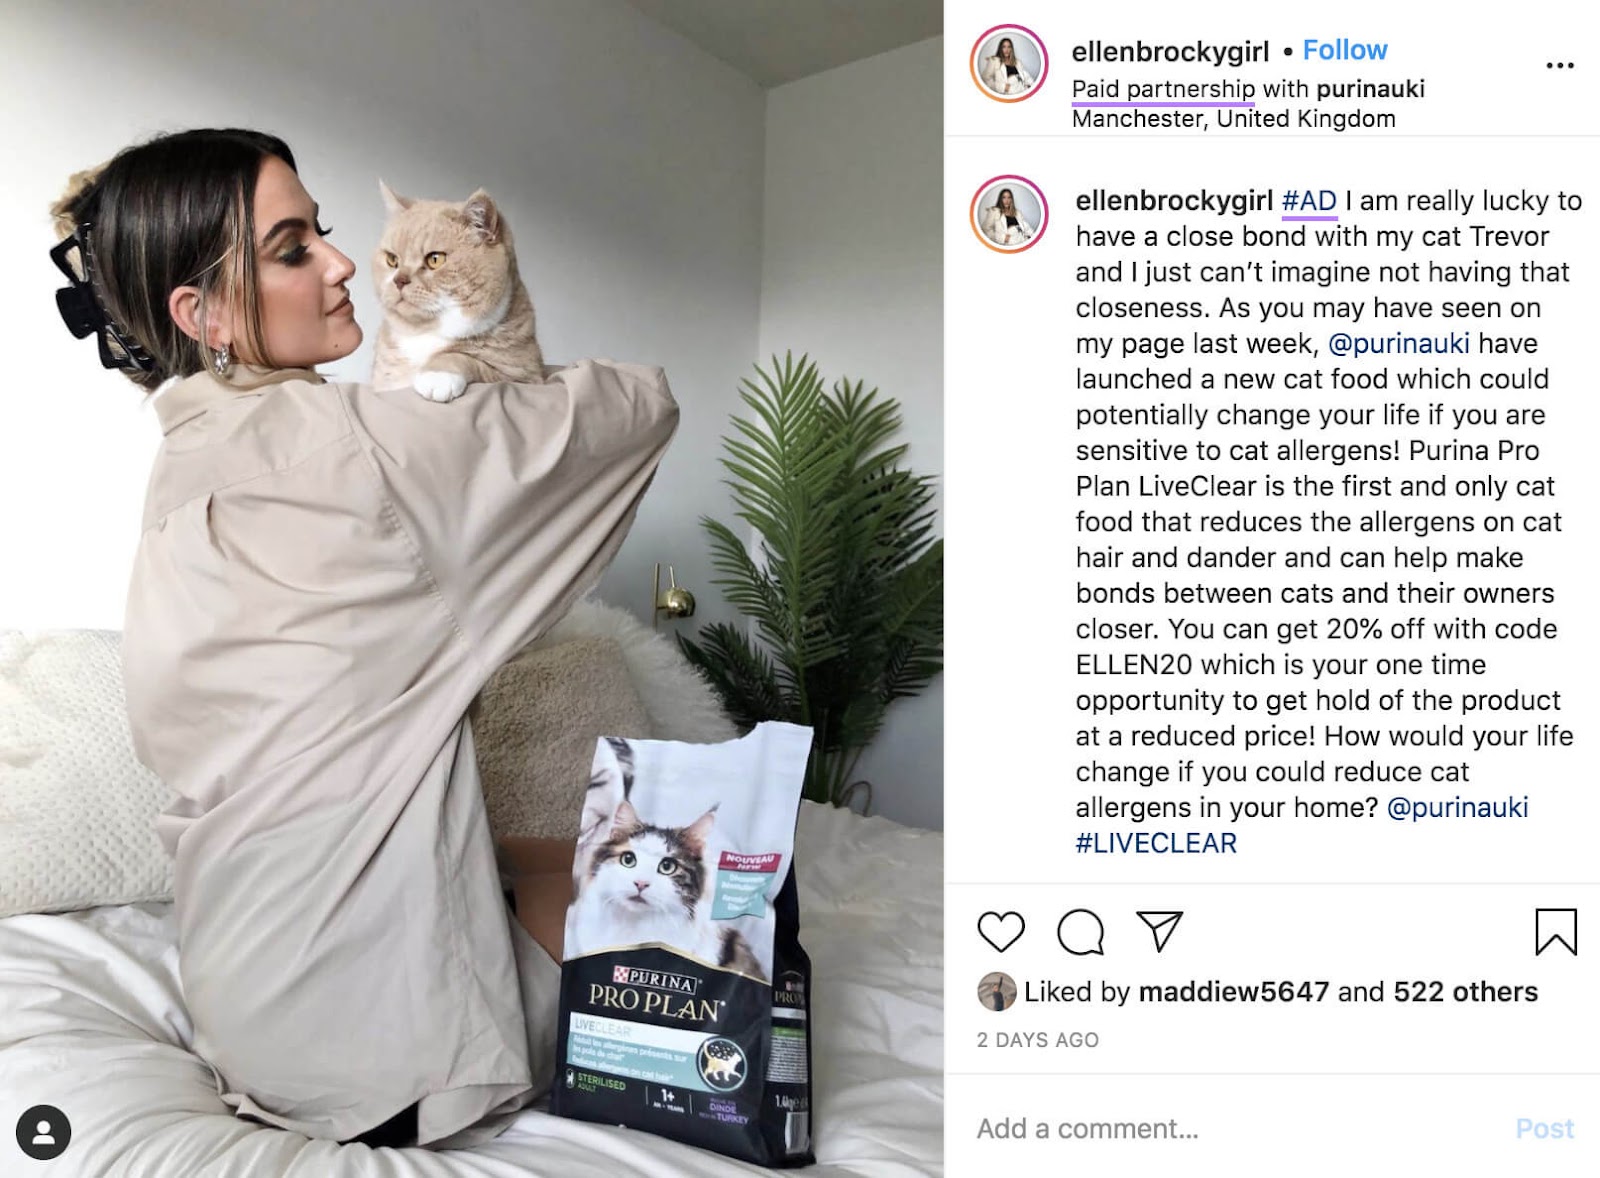 A paid station  by an influencer @ellenbrockygirl connected  Instagram, promoting Purina's feline  food